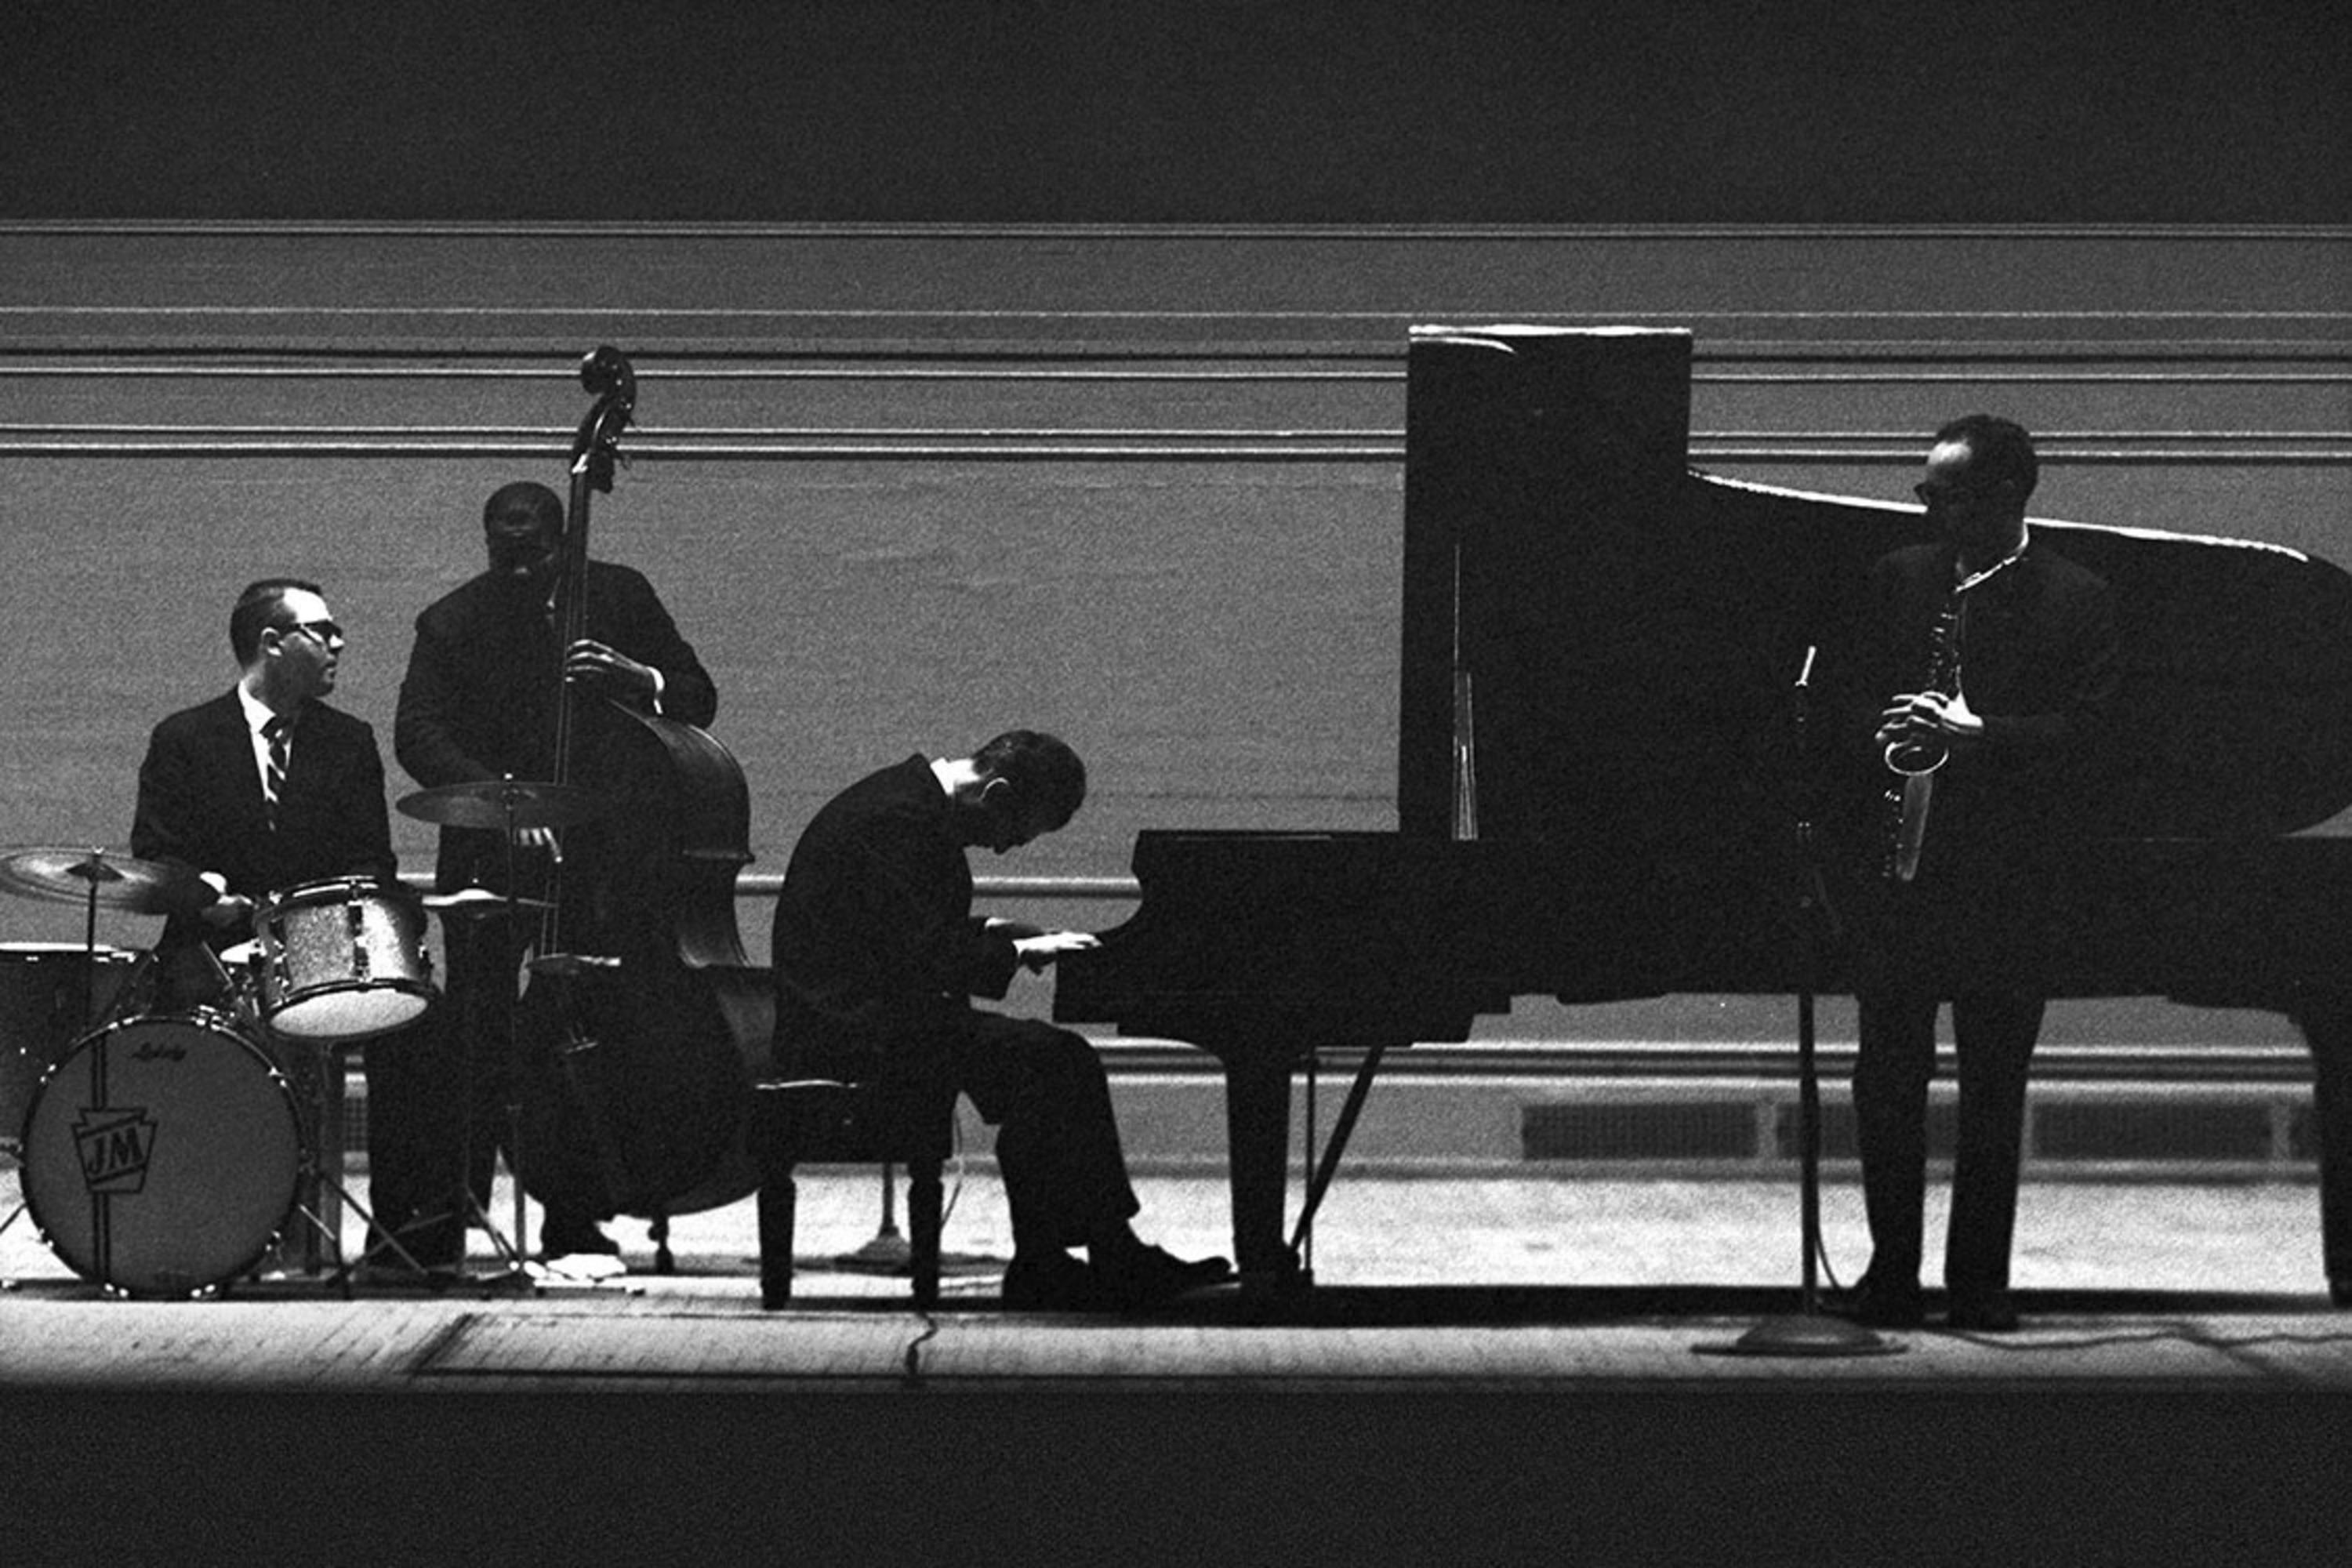 Estate-stamped, gelatin-print silver

The Dave Brubeck Quartet At Orchestra Hall at Symphony Center, Chicago, April 1961

Available sizes: 
16”x20" Edition of 25
20”x24" Edition of 25
30”x40" Edition of 25
40”x60” Edition of 25

This photograph will